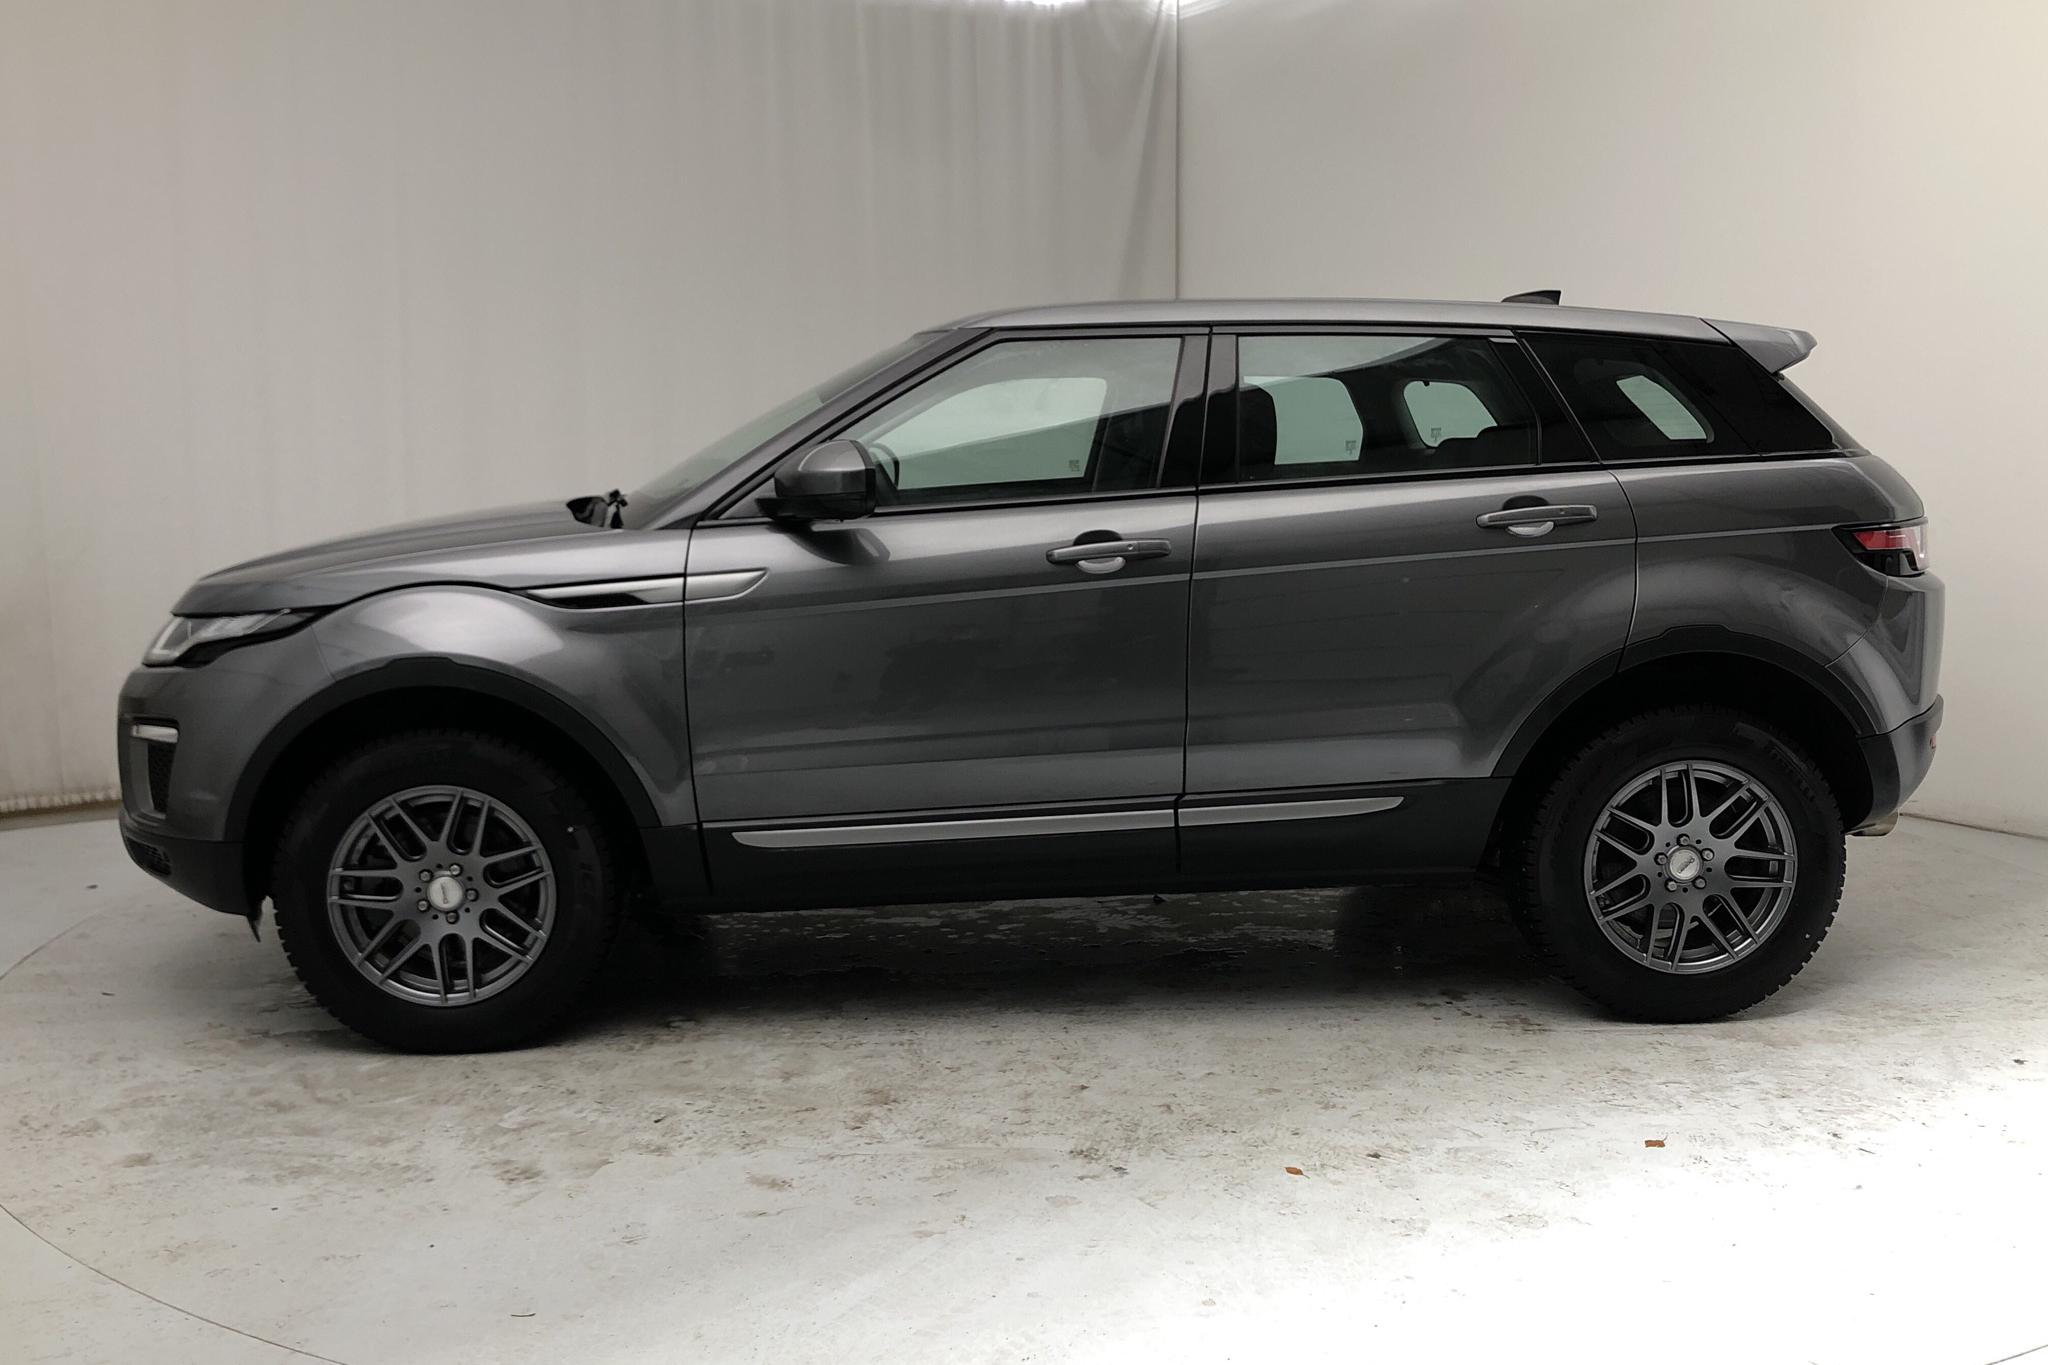 Land Rover Range Rover Evoque 2.0 TD4 AWD 5dr (150hk) - 11 950 km - Automatic - gray - 2017